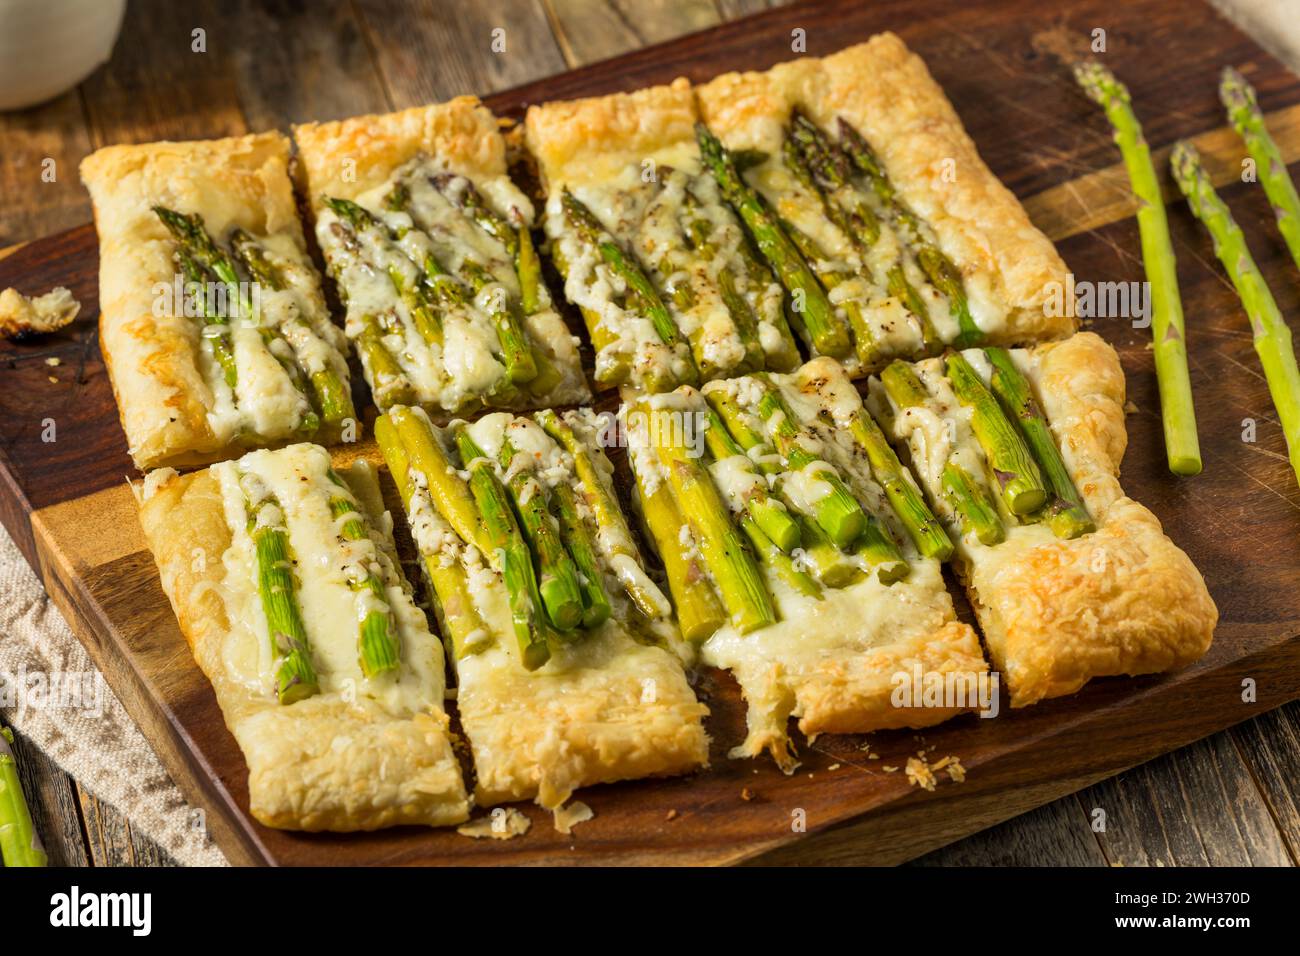 Homemade Baked Puff Pastry Asparagus Tart with Cheese for an Appetizer Stock Photo